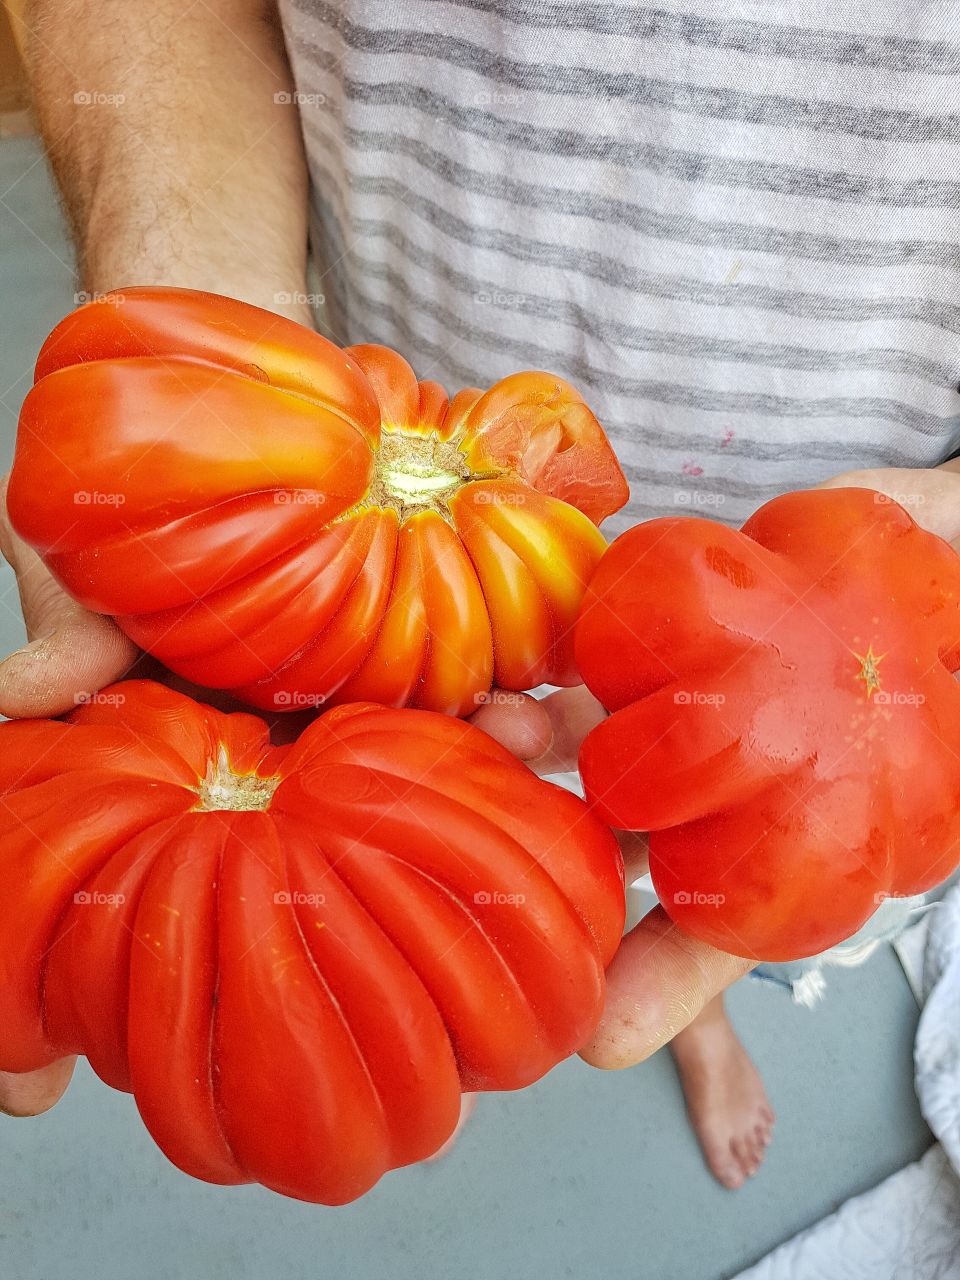 Oxheart tomatoes